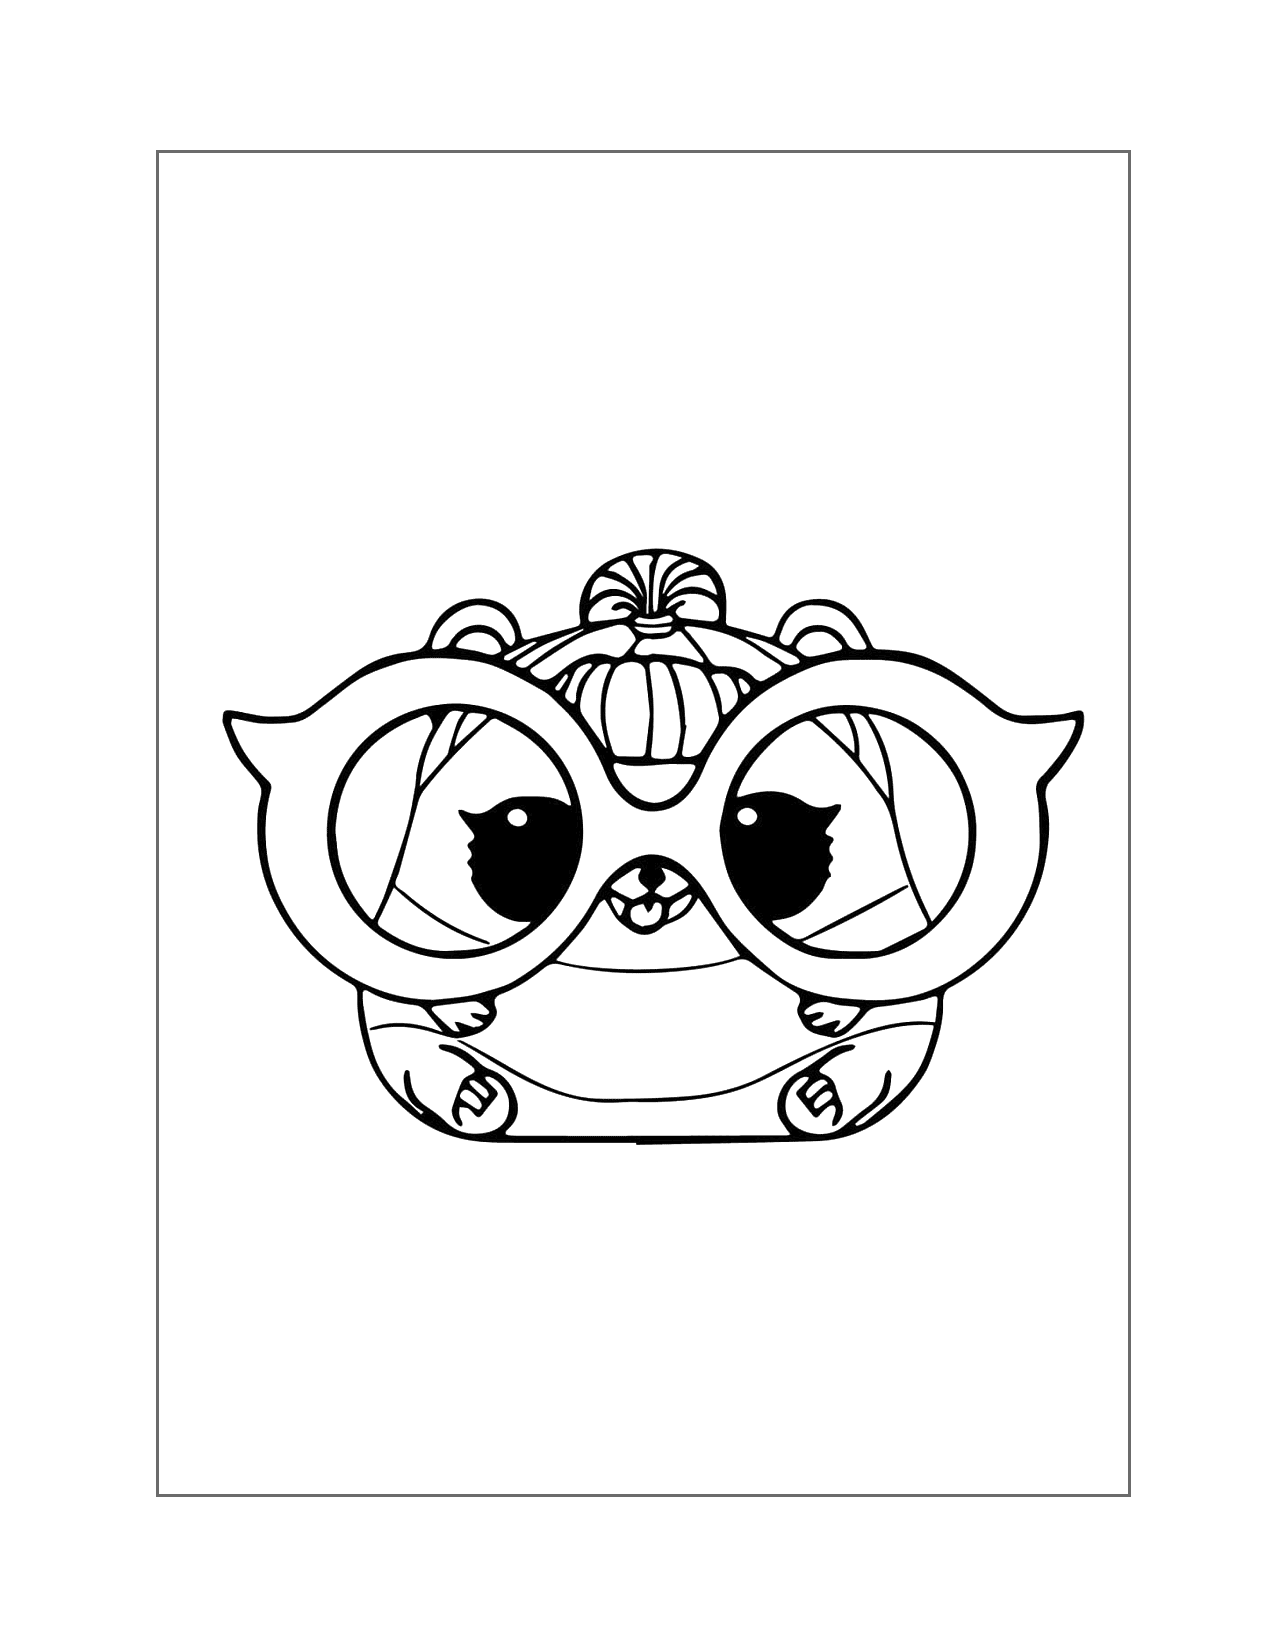 Cherry Ham Lol Coloring Page